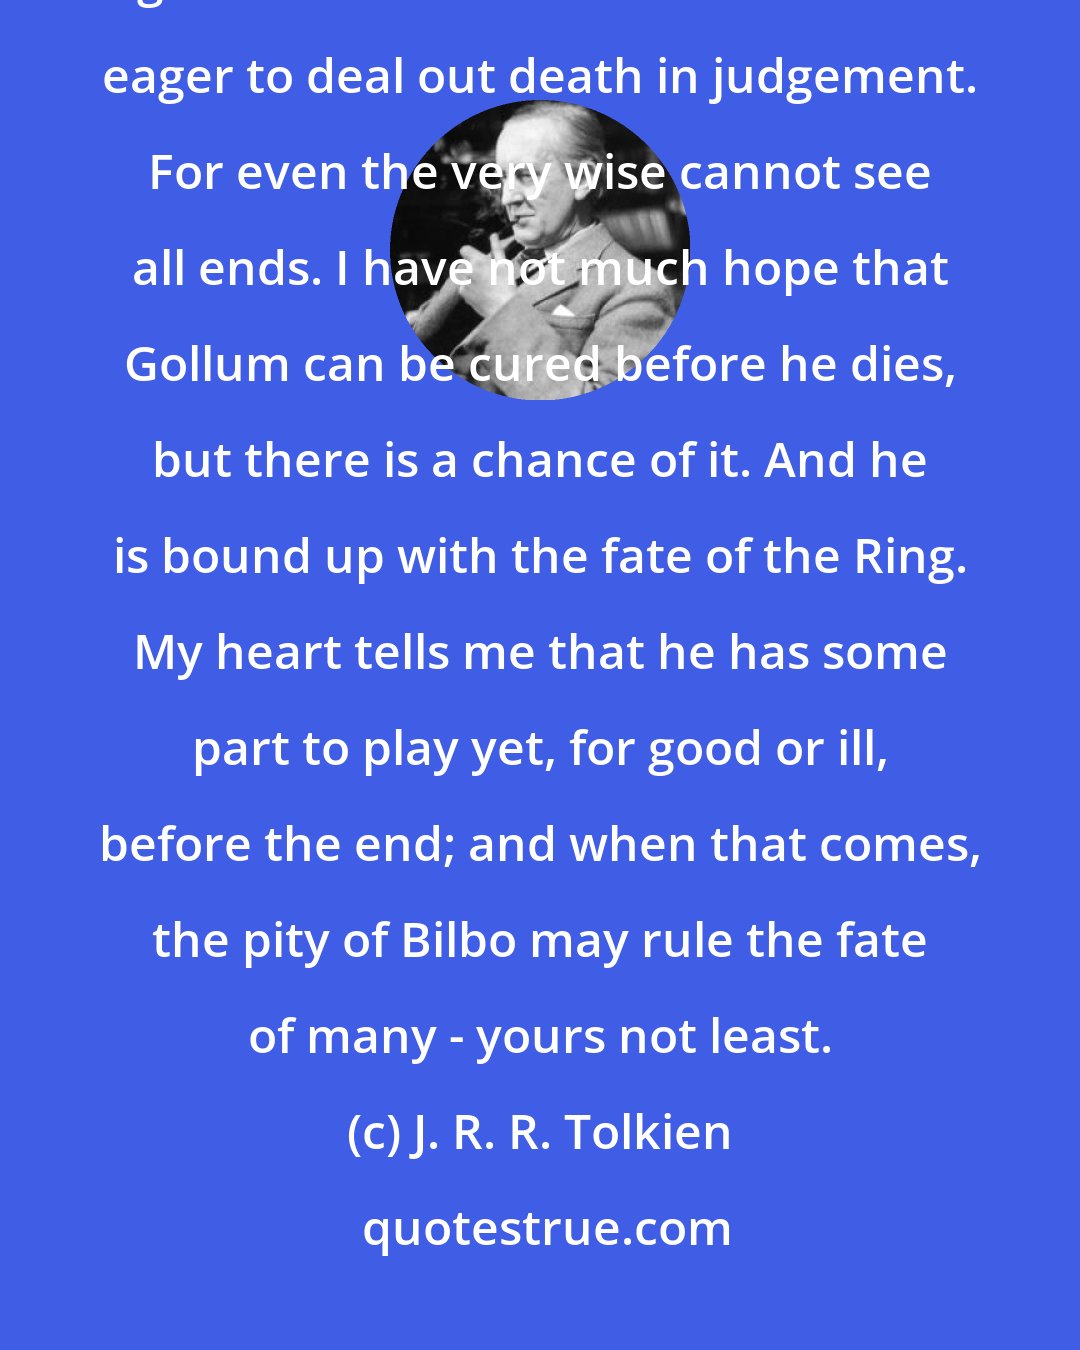 J. R. R. Tolkien: Many that live deserve death. And some that die deserve life. Can you give it to them? Then do not be too eager to deal out death in judgement. For even the very wise cannot see all ends. I have not much hope that Gollum can be cured before he dies, but there is a chance of it. And he is bound up with the fate of the Ring. My heart tells me that he has some part to play yet, for good or ill, before the end; and when that comes, the pity of Bilbo may rule the fate of many - yours not least.